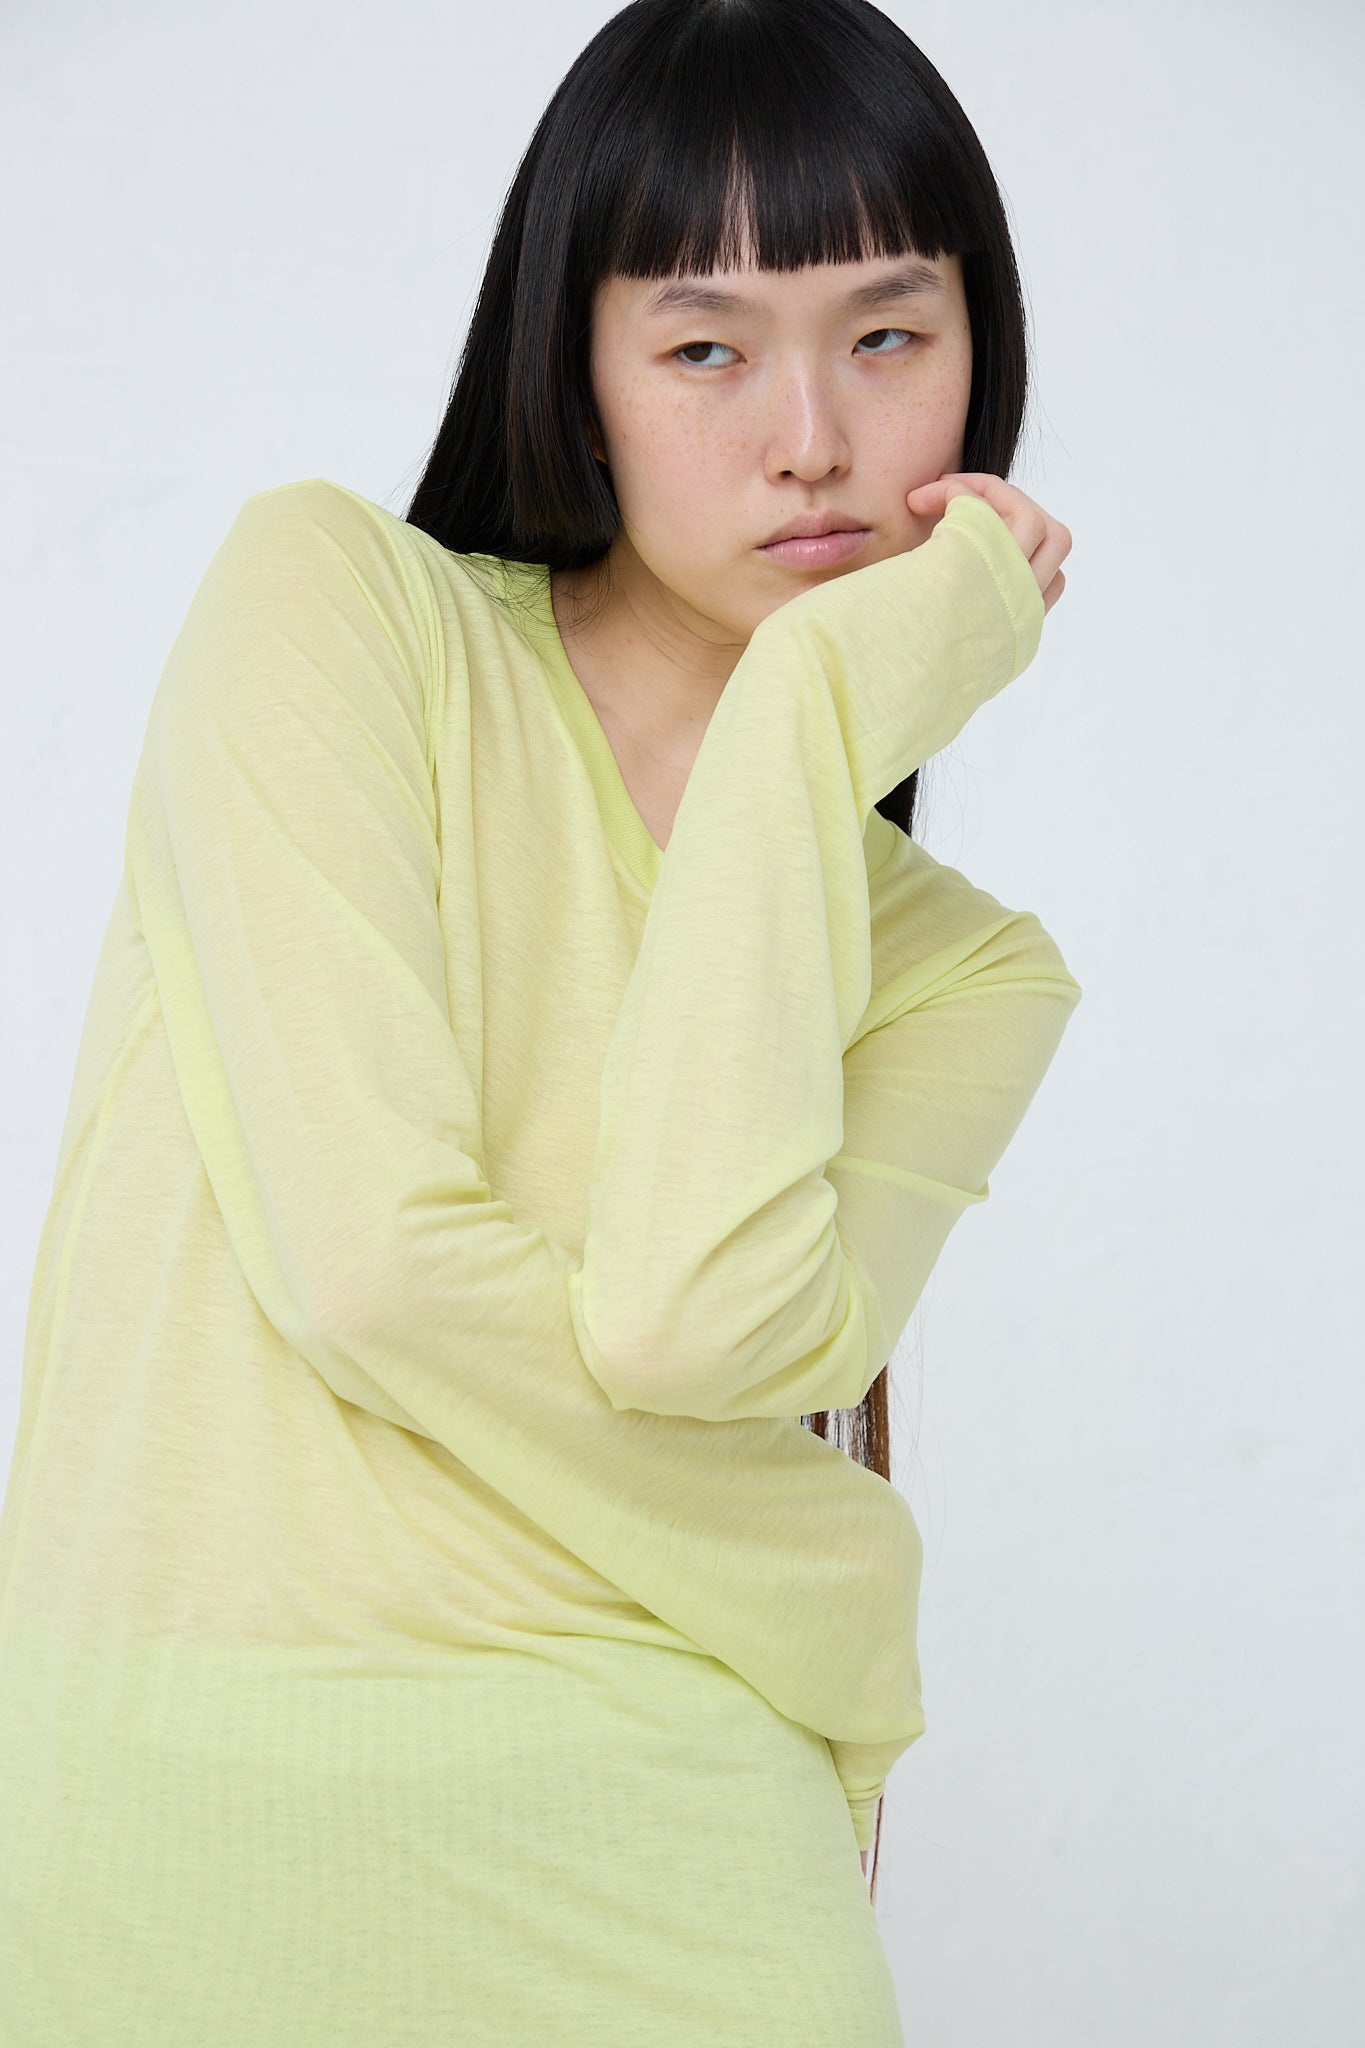 Bamboo Long Sleeve Tee in Lime, made by Baserange, is crafted from sustainable bamboo lyocell. Front view. Model's arms are crossed and the left hand is placed under her chin.